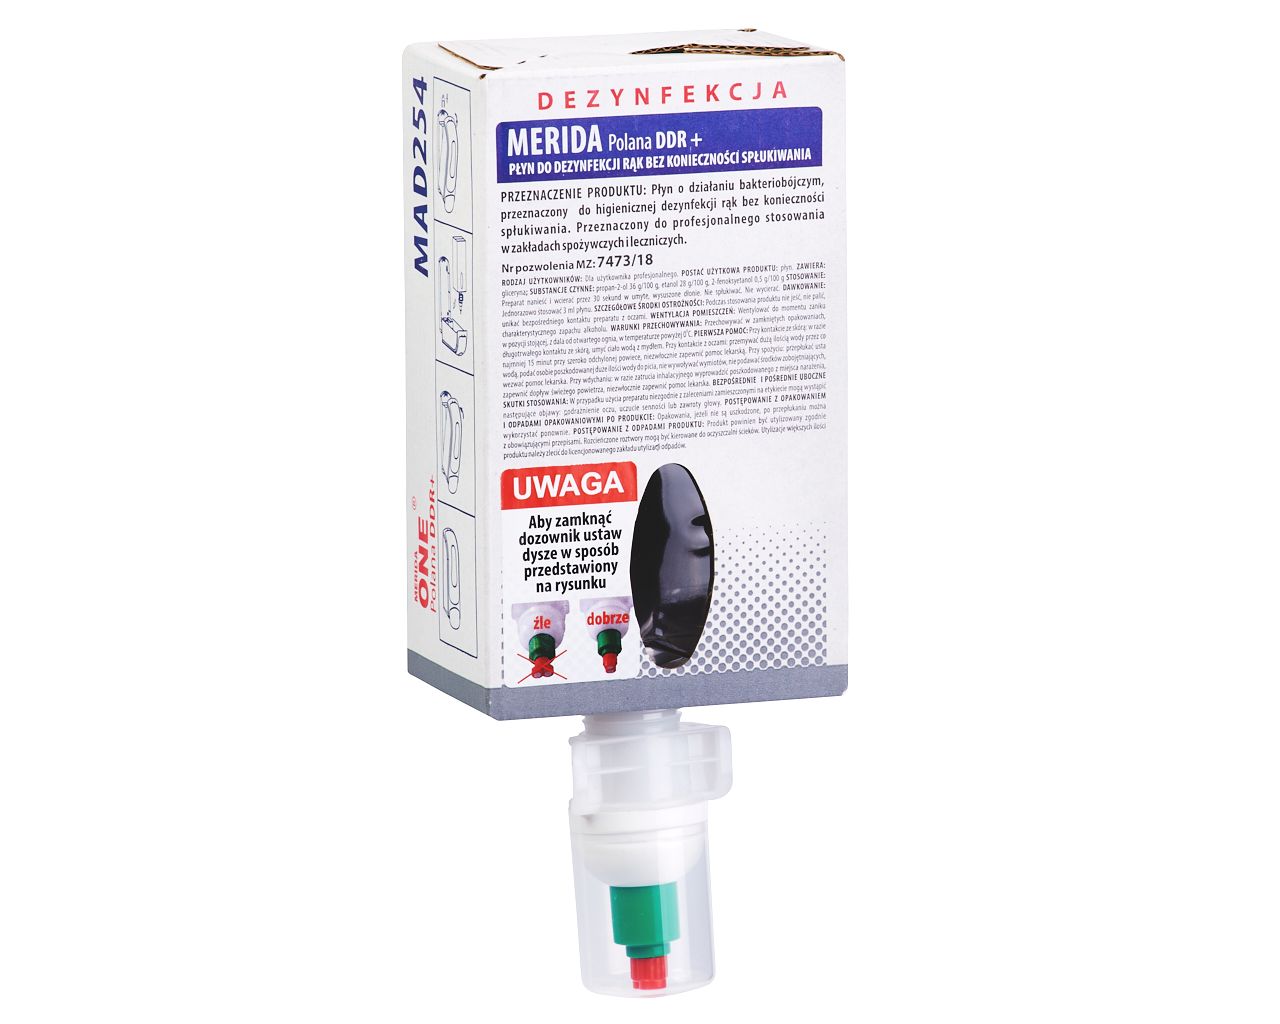 MERIDA POLANA DDR+ liquid for hygienic hand disinfection, disposable pouch 700 ml for MERIDA ONE mechanical dispenser